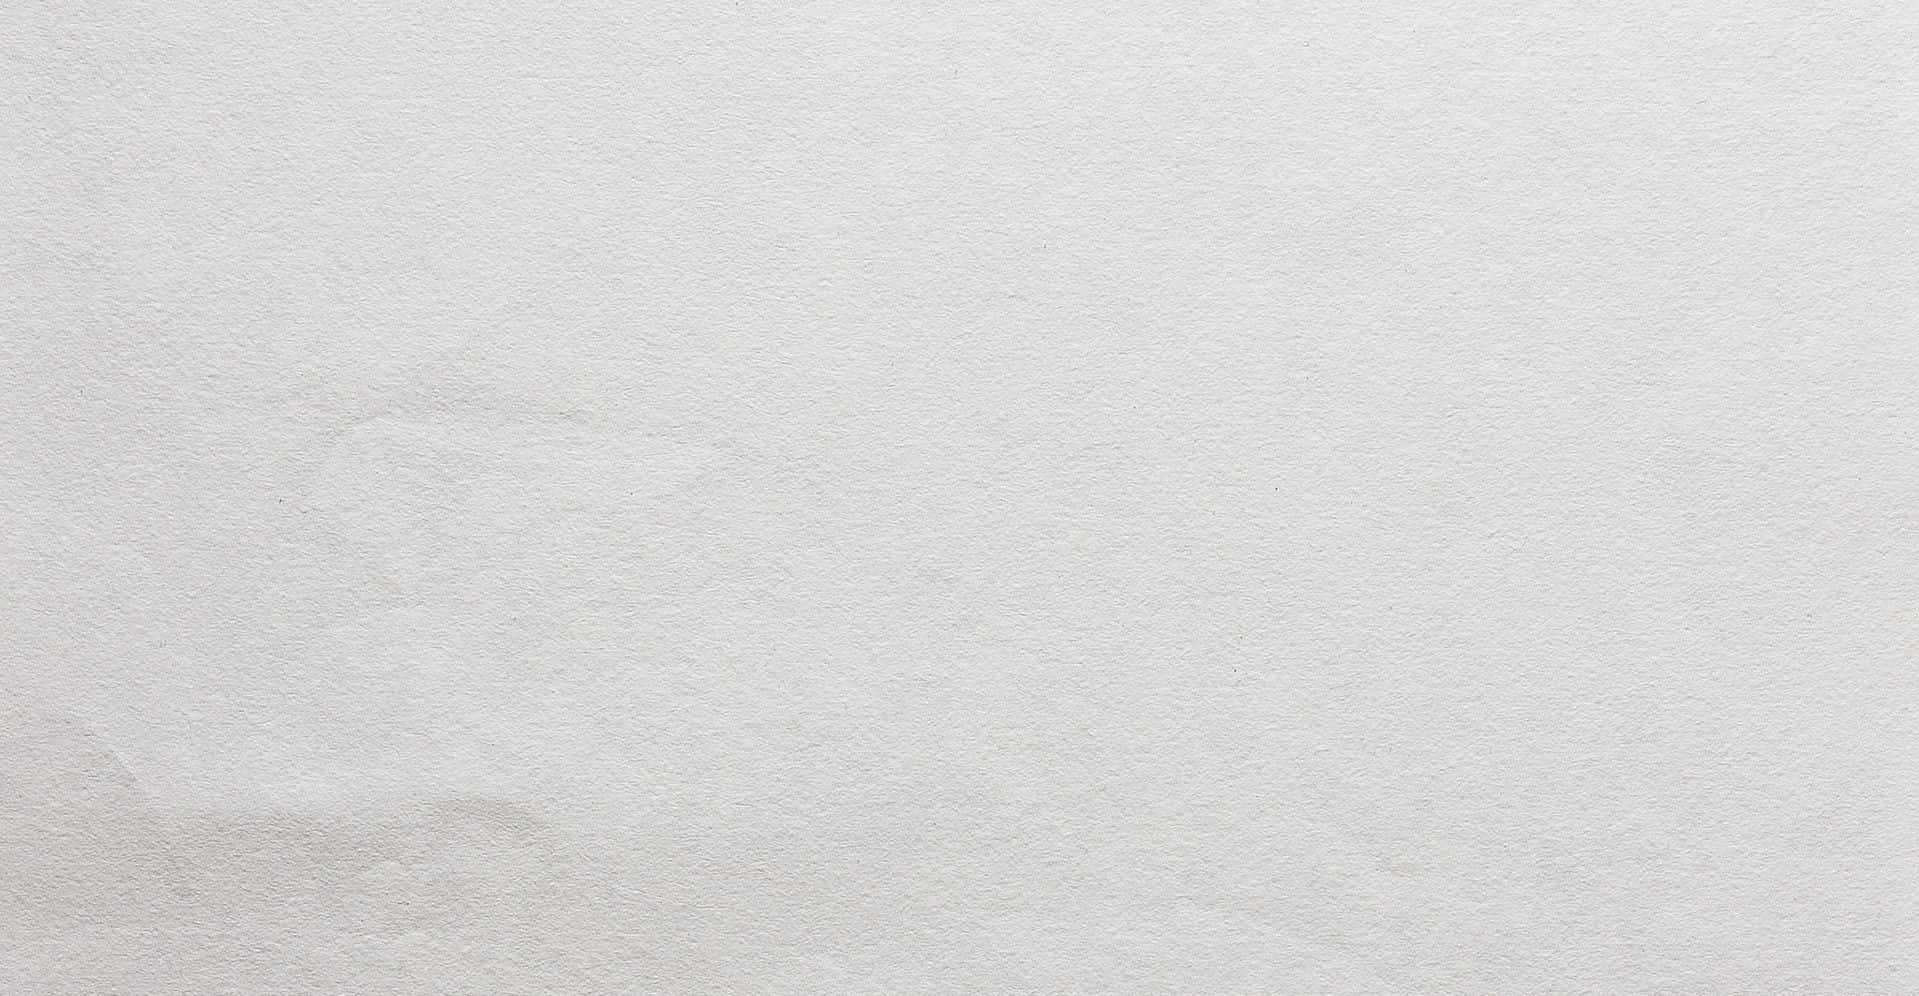 A blank white paper background perfect for taking notes and writing down ideas